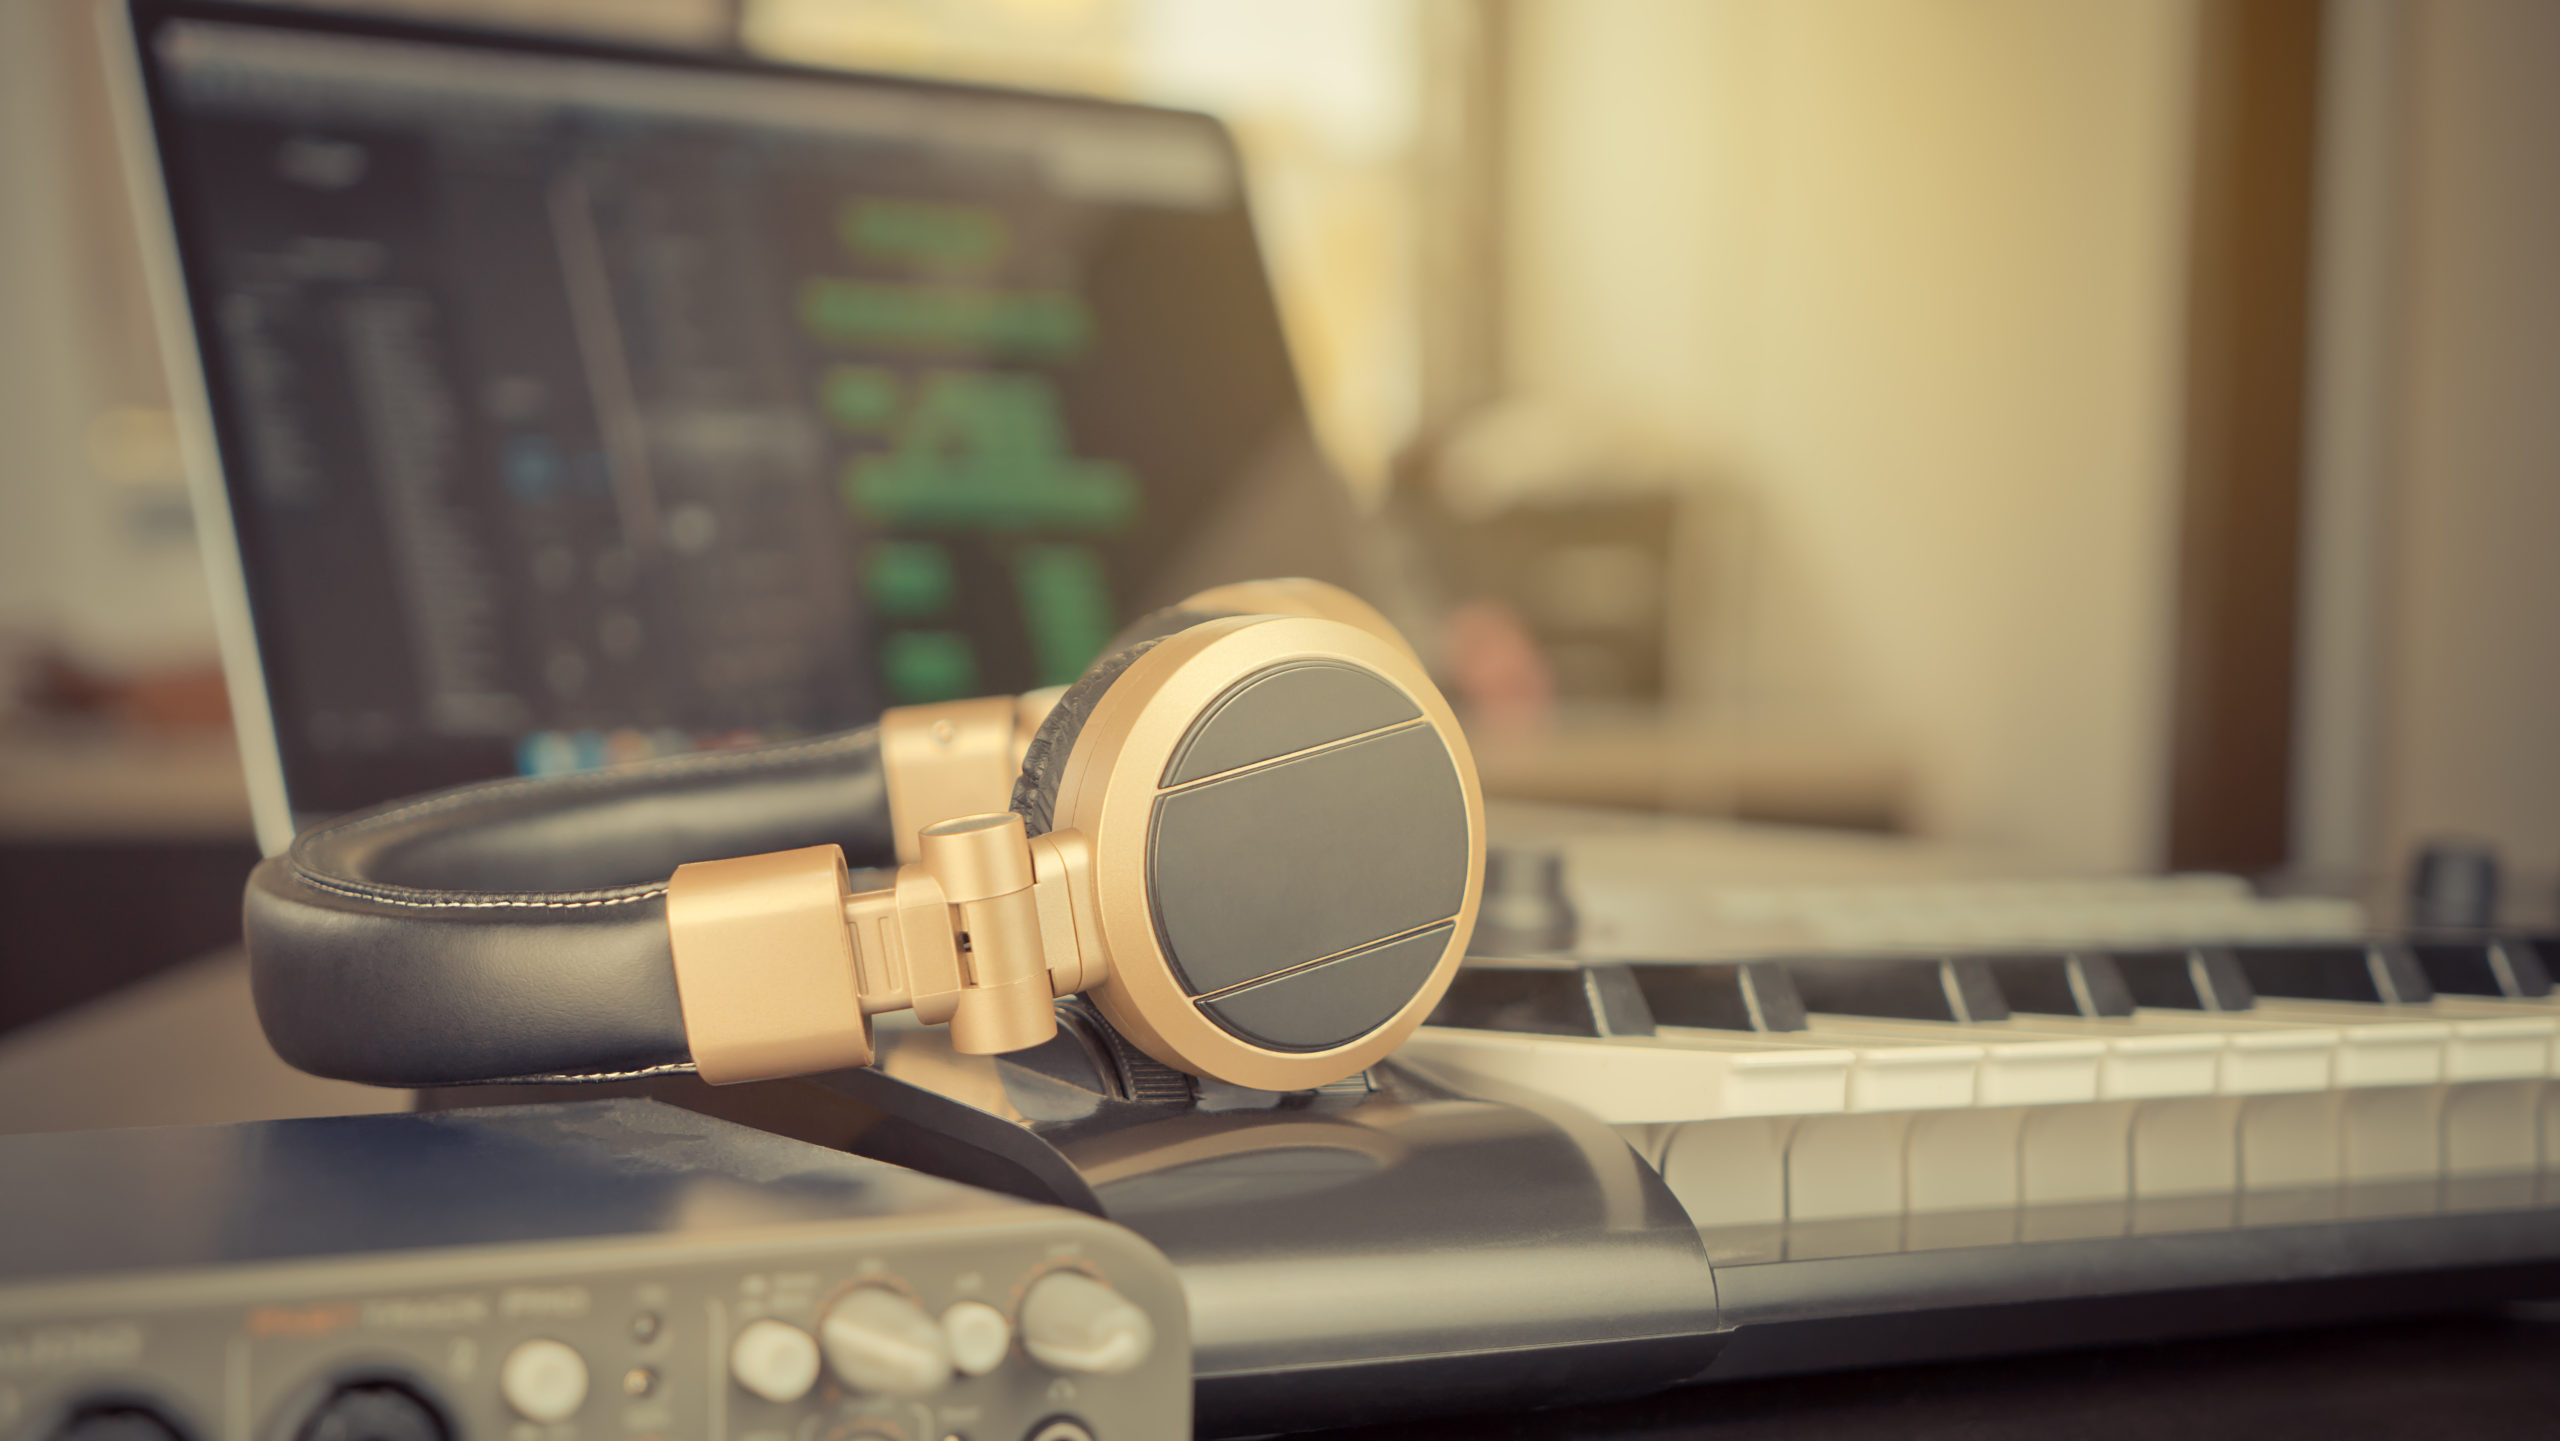 How to Make a Recording Studio in Your Room – The Ultimate (and Only) Guide You’ll Need